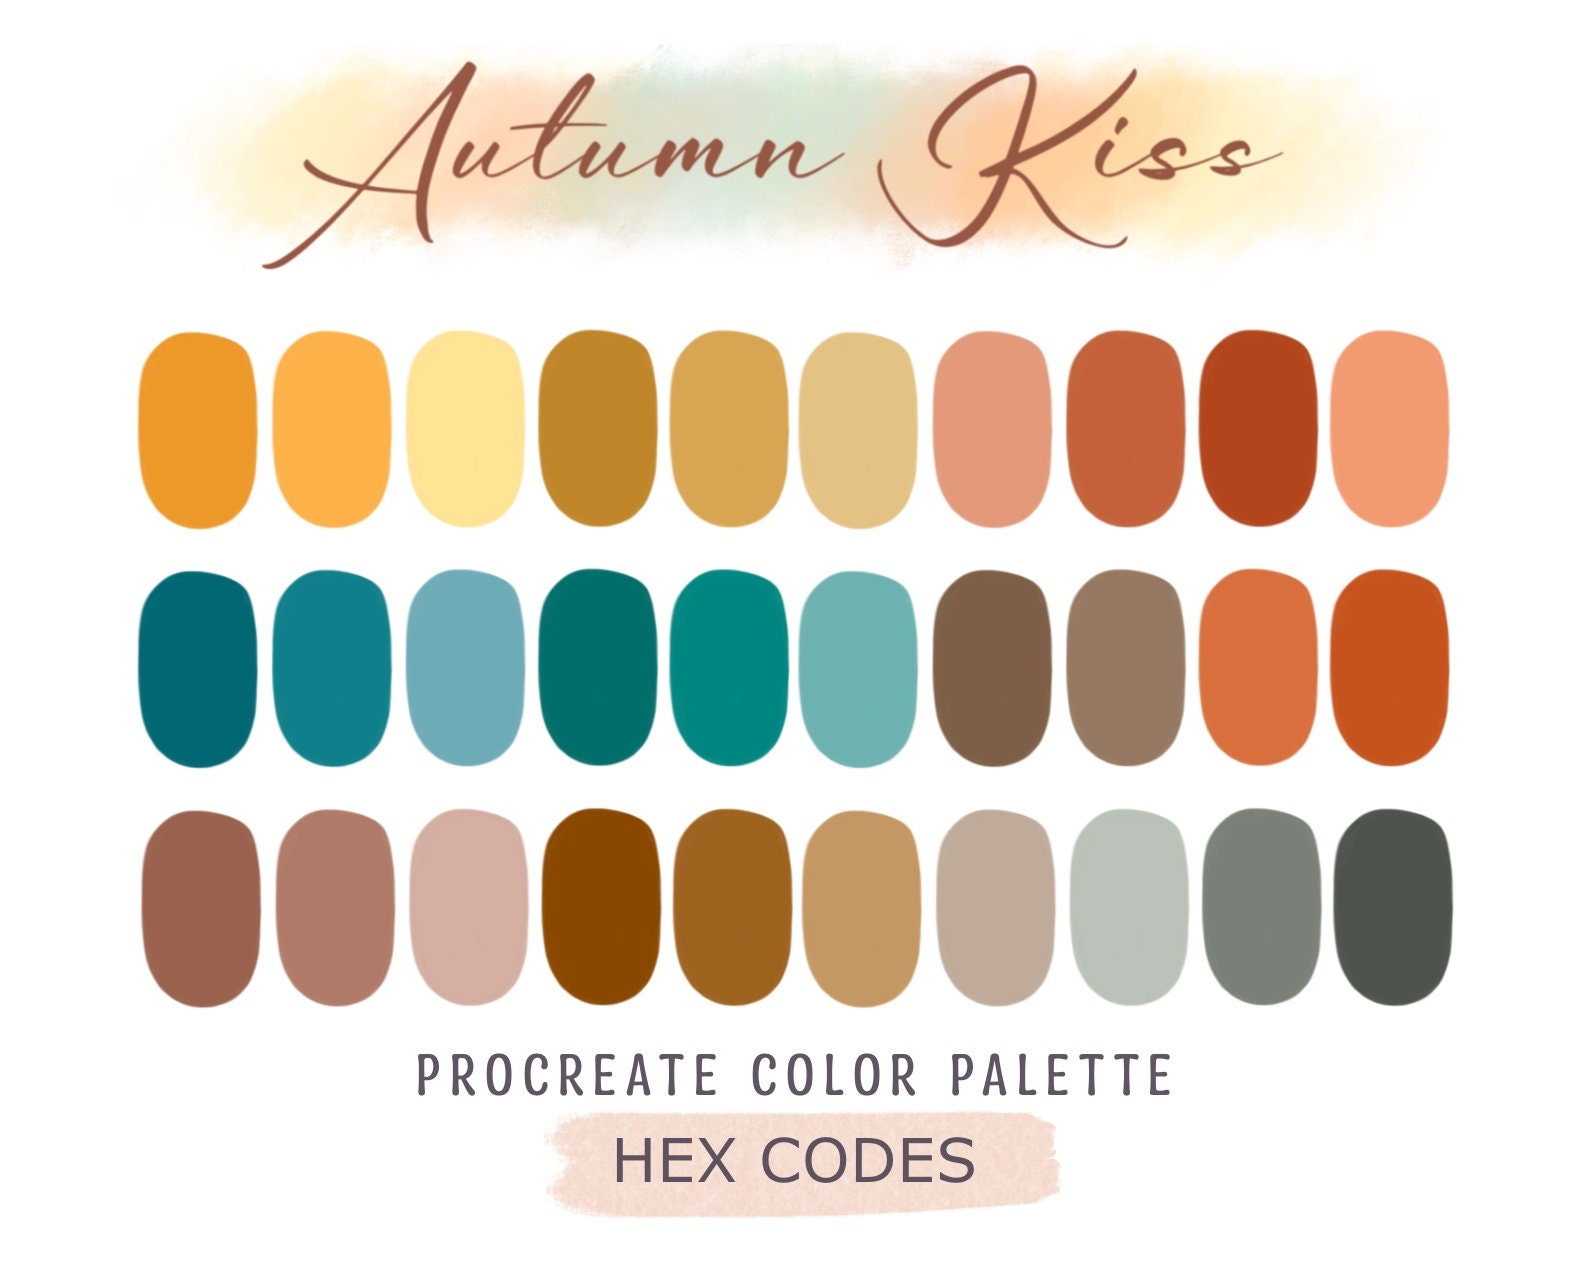 Color Harmony Swatch Book Palette for Dark Autumn 